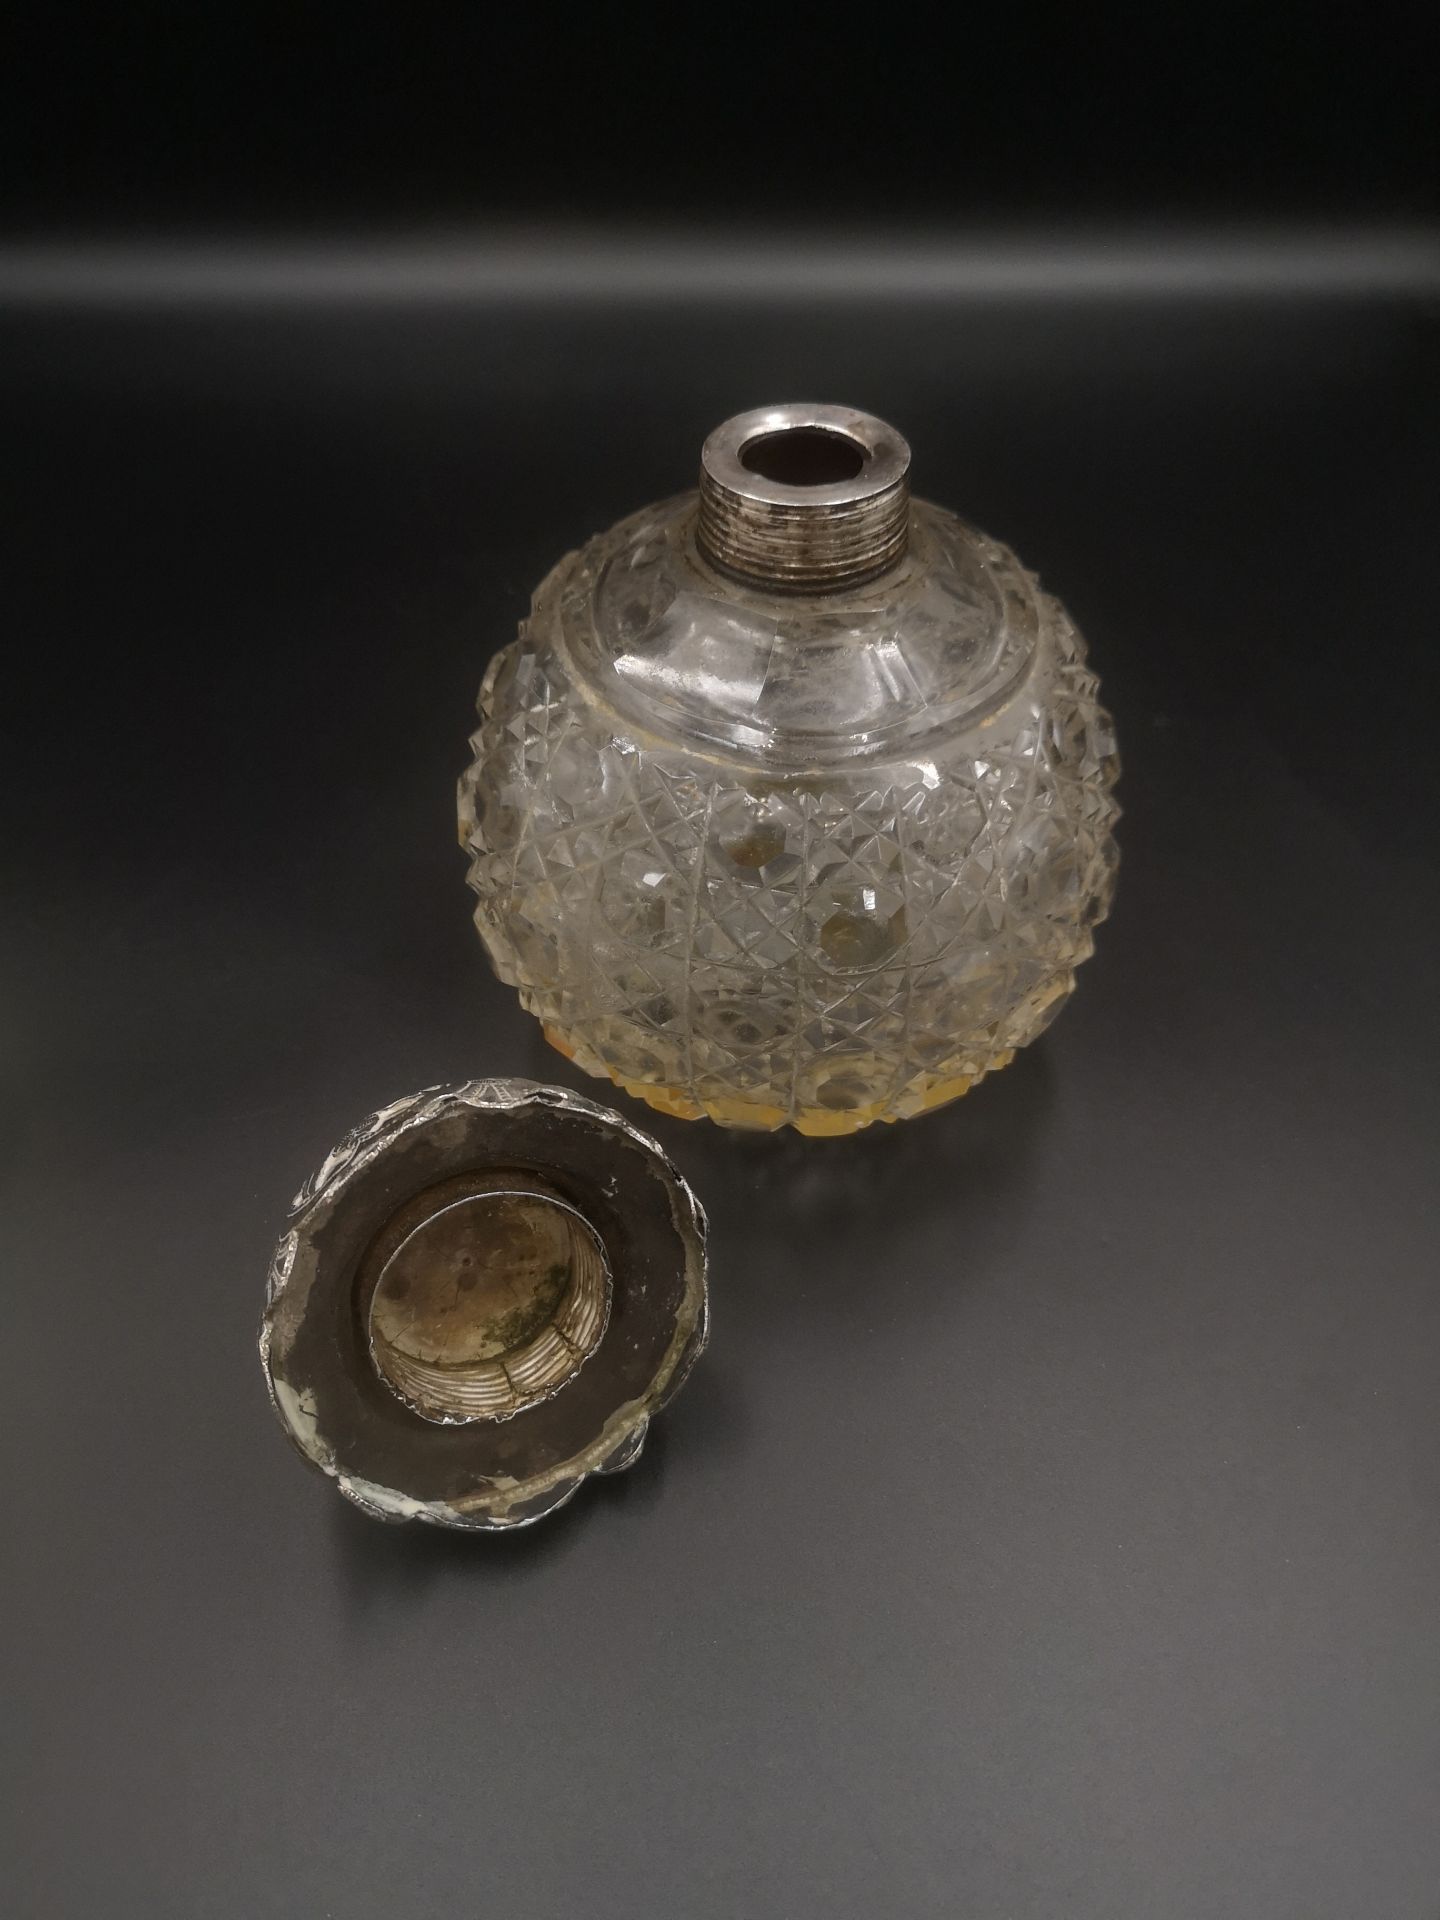 Cut glass perfume bottle together with a white metal filigree tray - Image 5 of 5